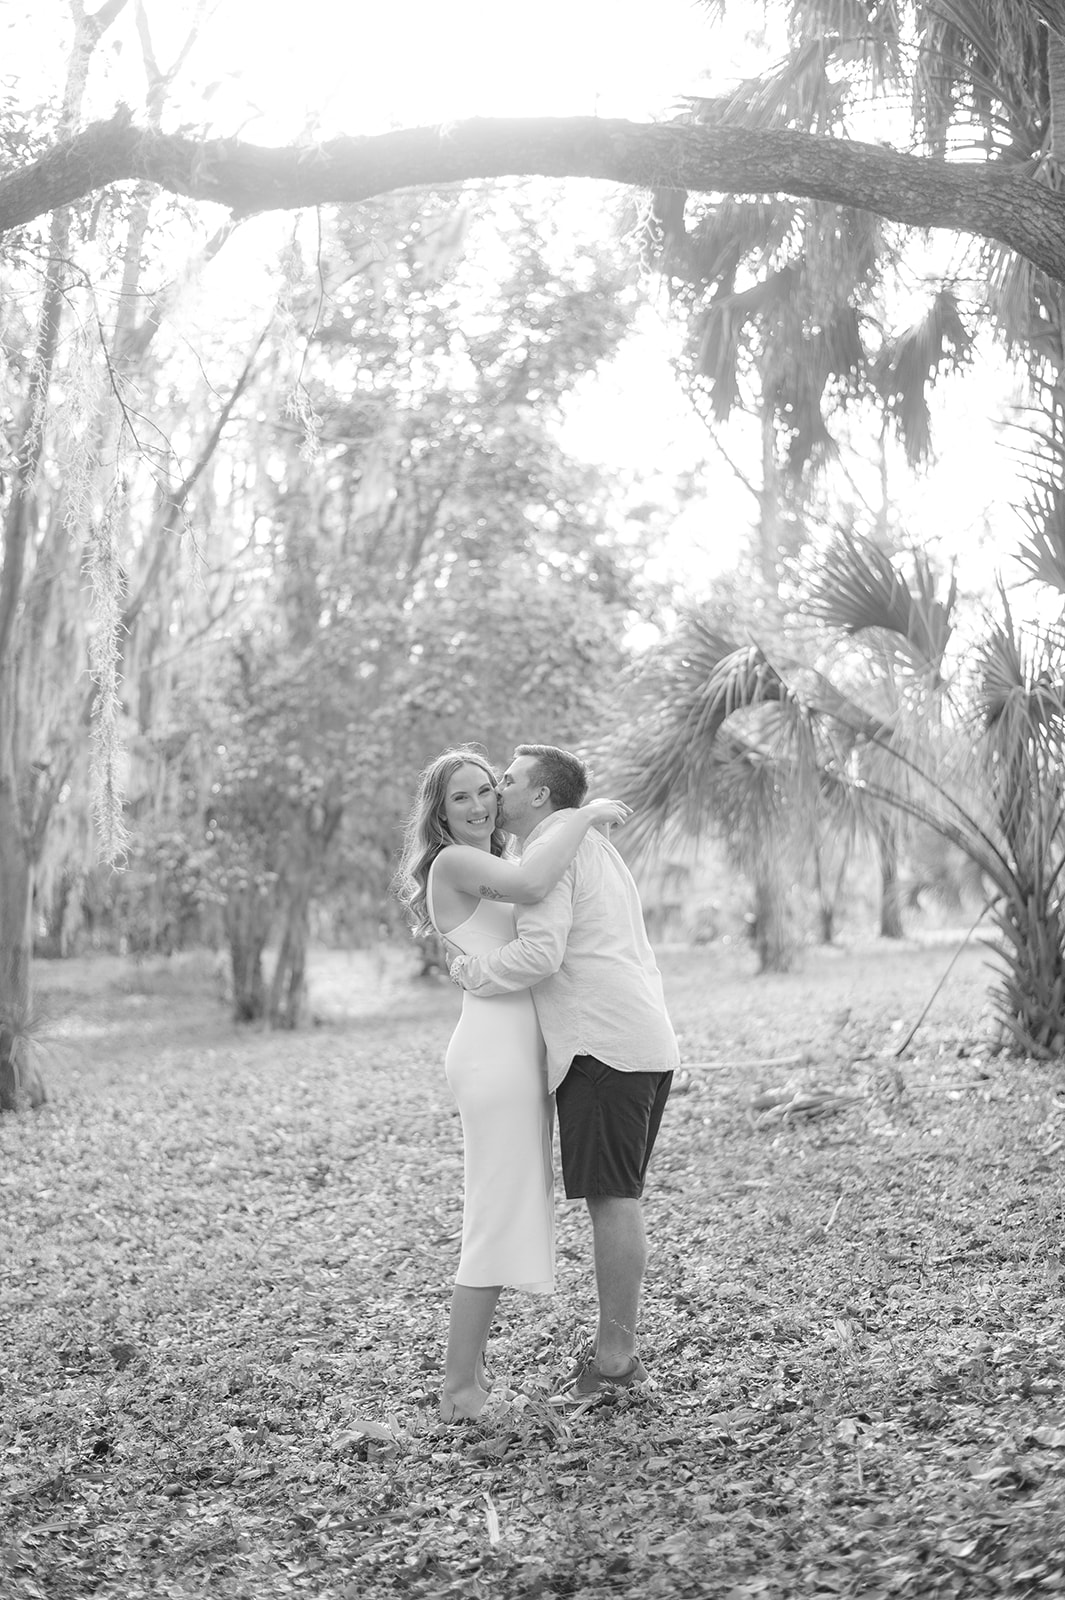 "Nature-inspired engagement photography in Tampa, Florida"
